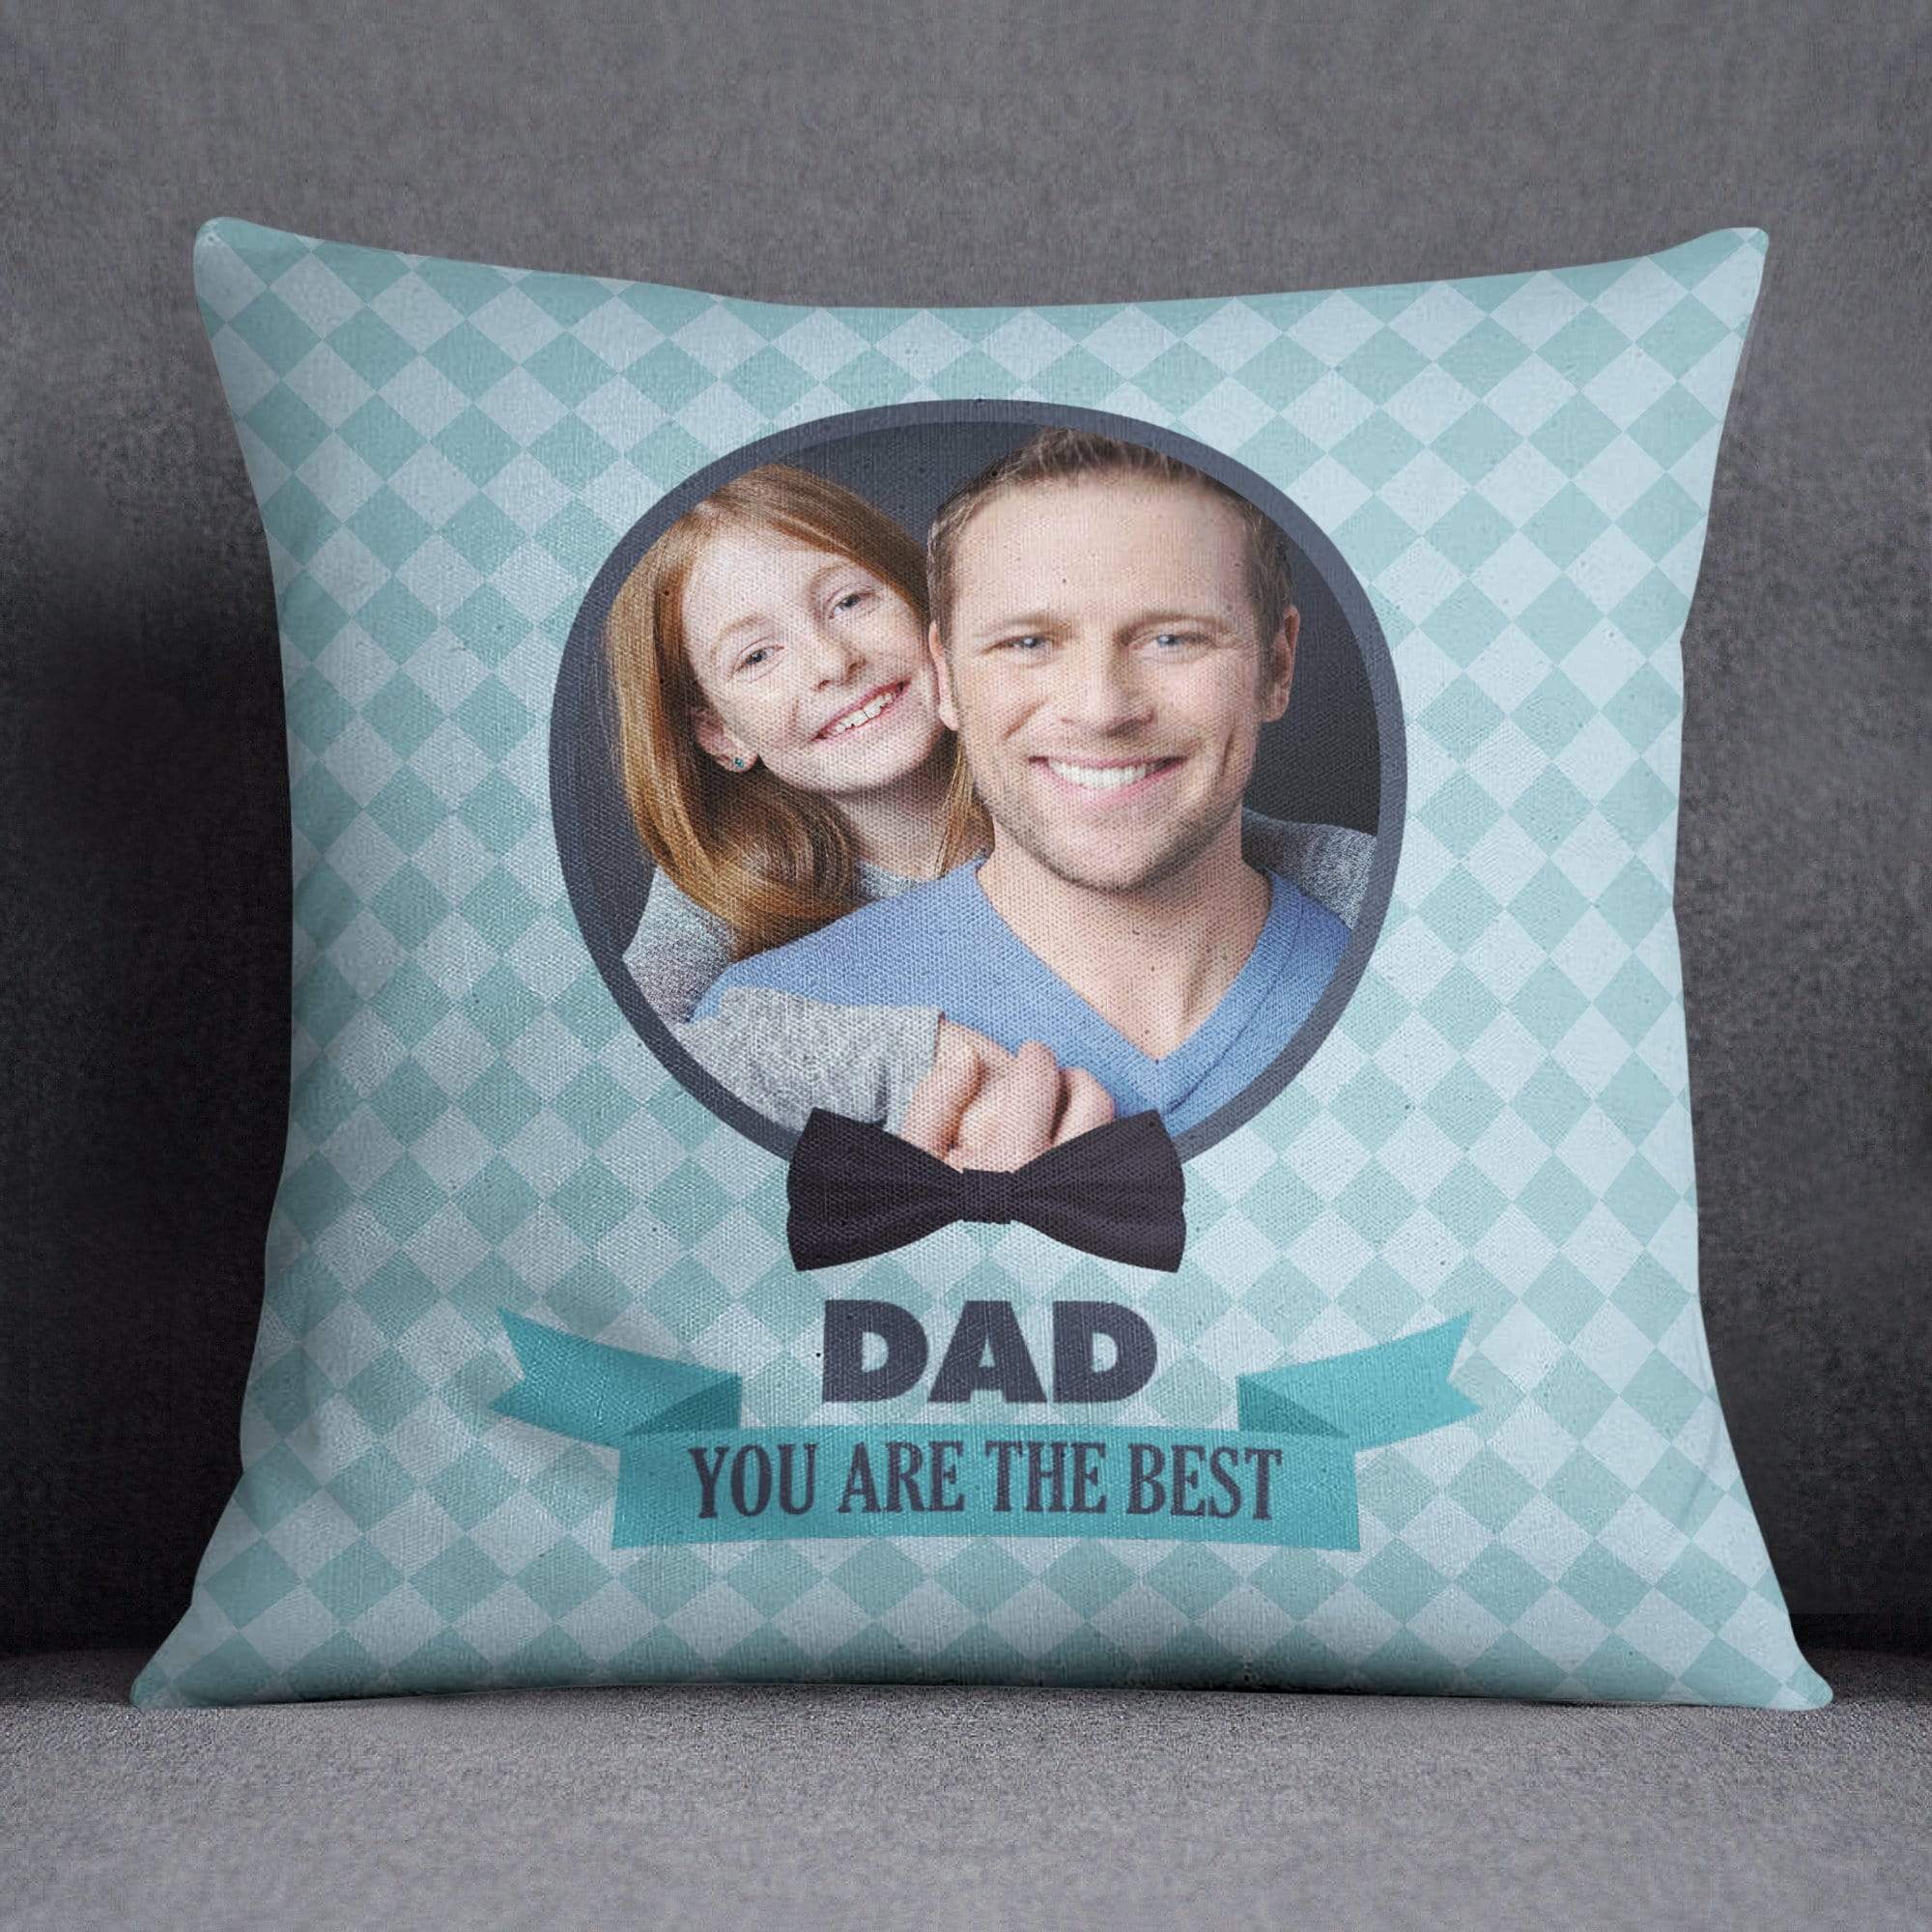 Dad You are the Best Photo Cushion